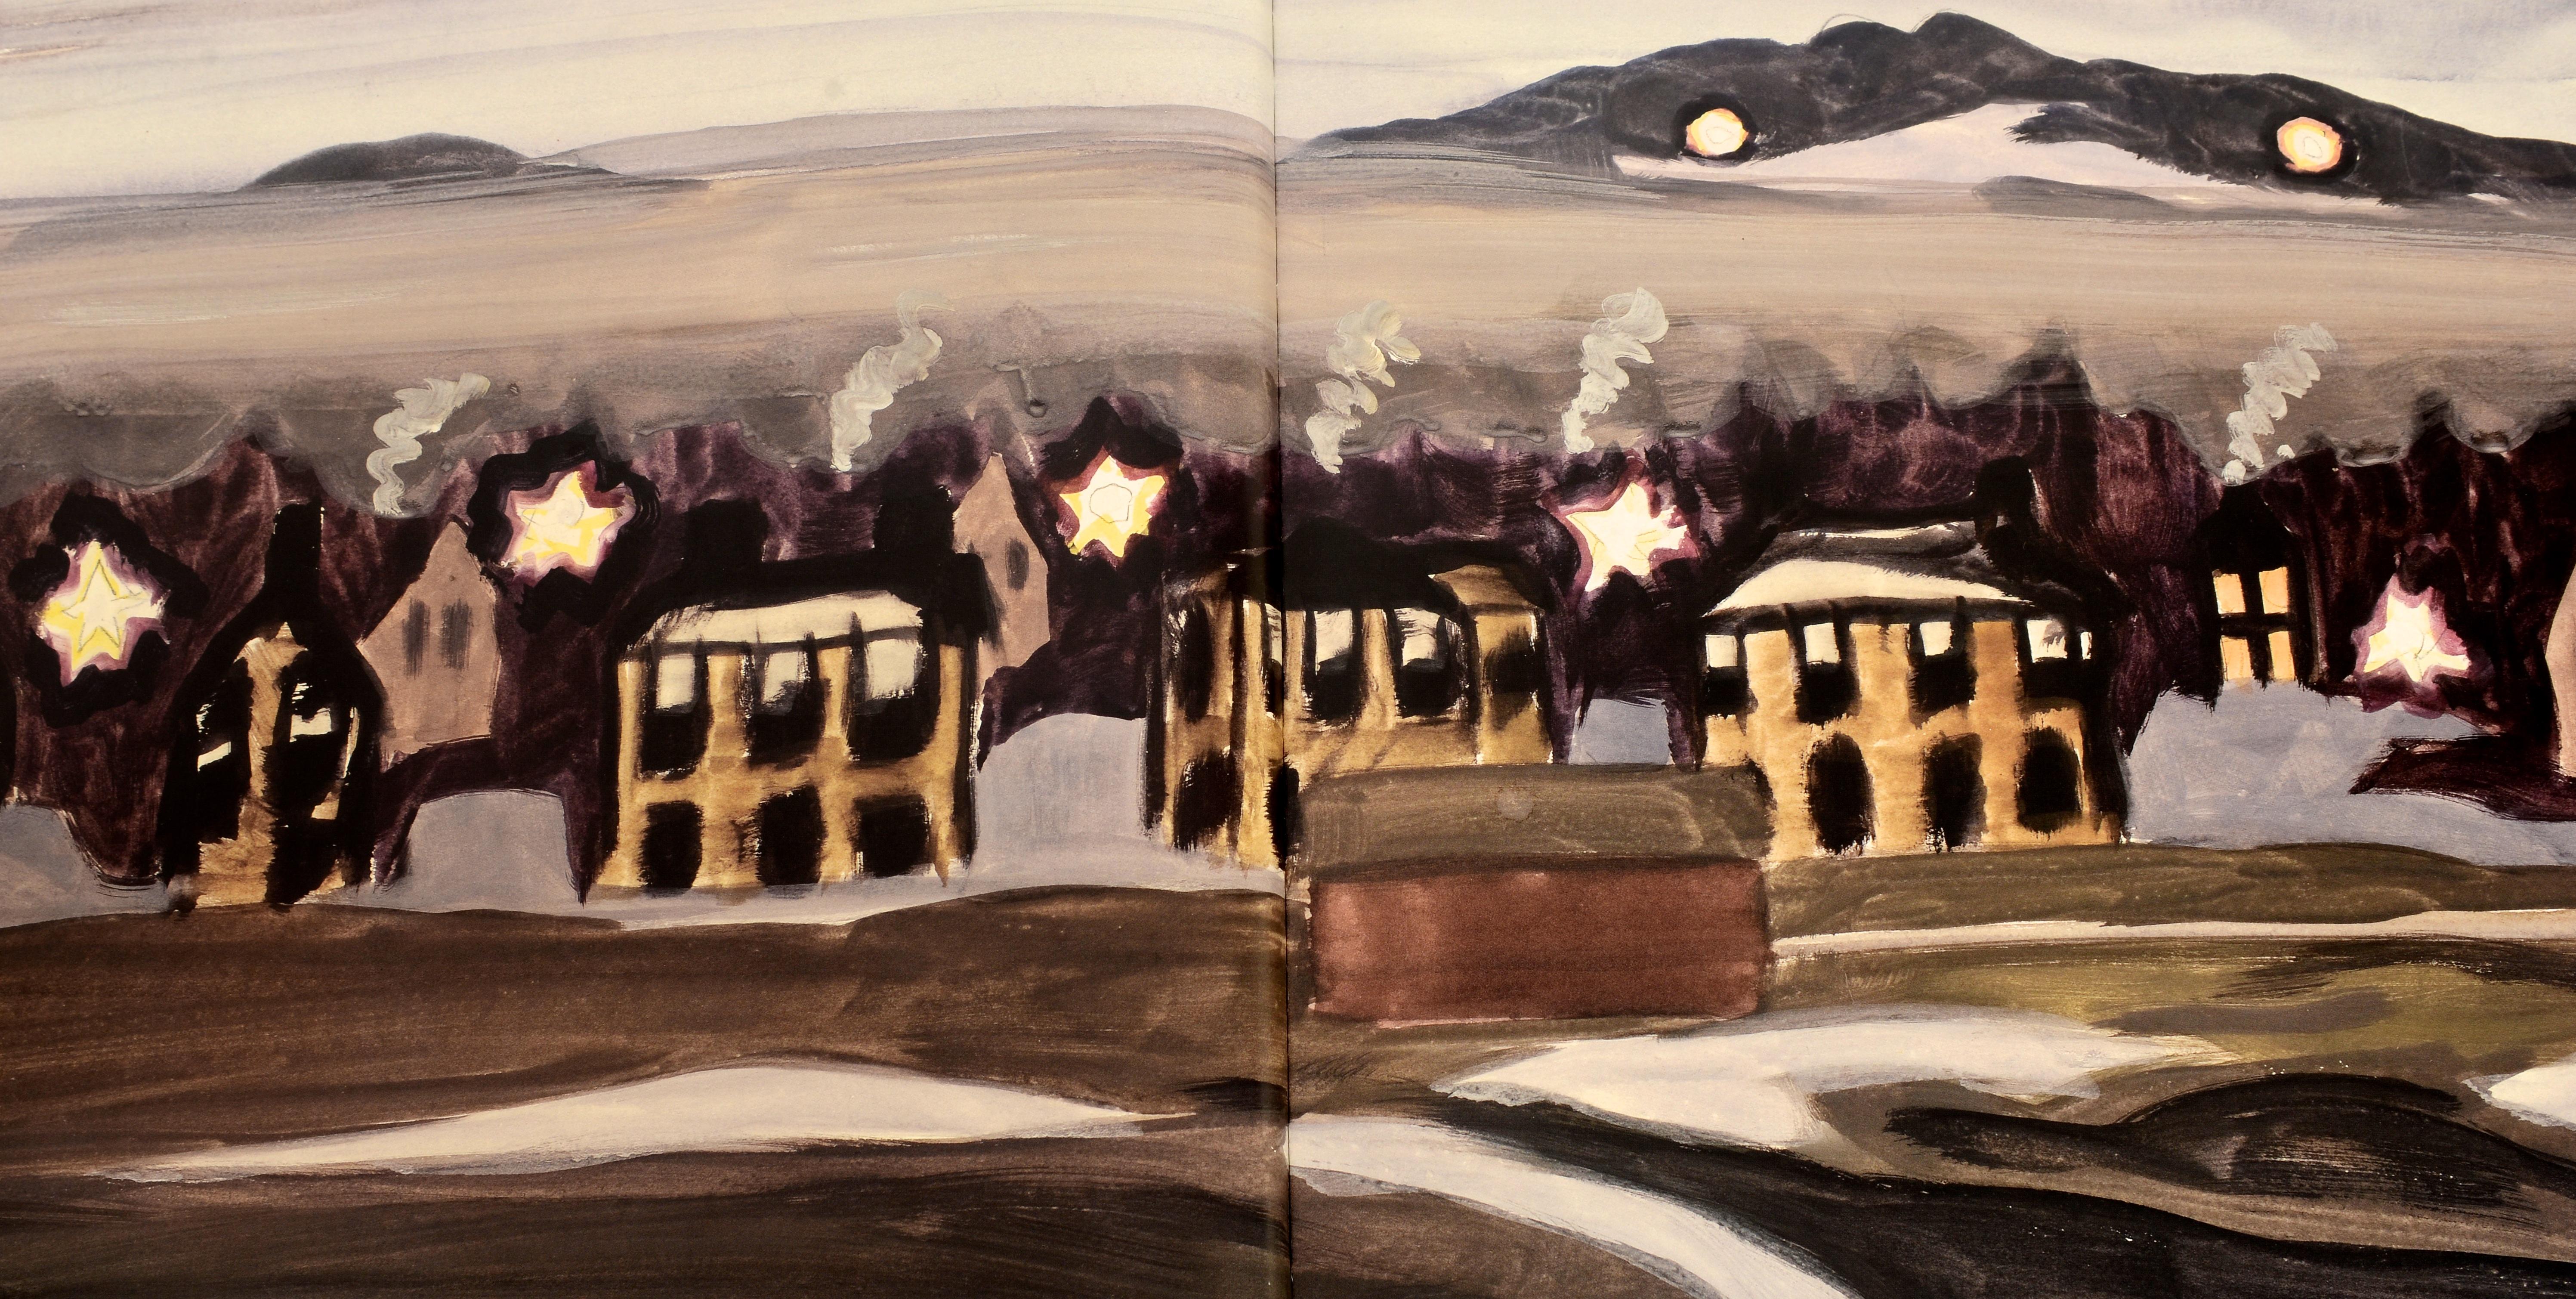 Charles Burchfield 1920: The Architecture of Painting, by Michael Hall. DC Moore Gallery, NY, 2009. 1st Ed hardcover, no dust jacket as published. Published for an exhibition at Columbus Museum of Art, Ohio, from May 22-August 2, and to the